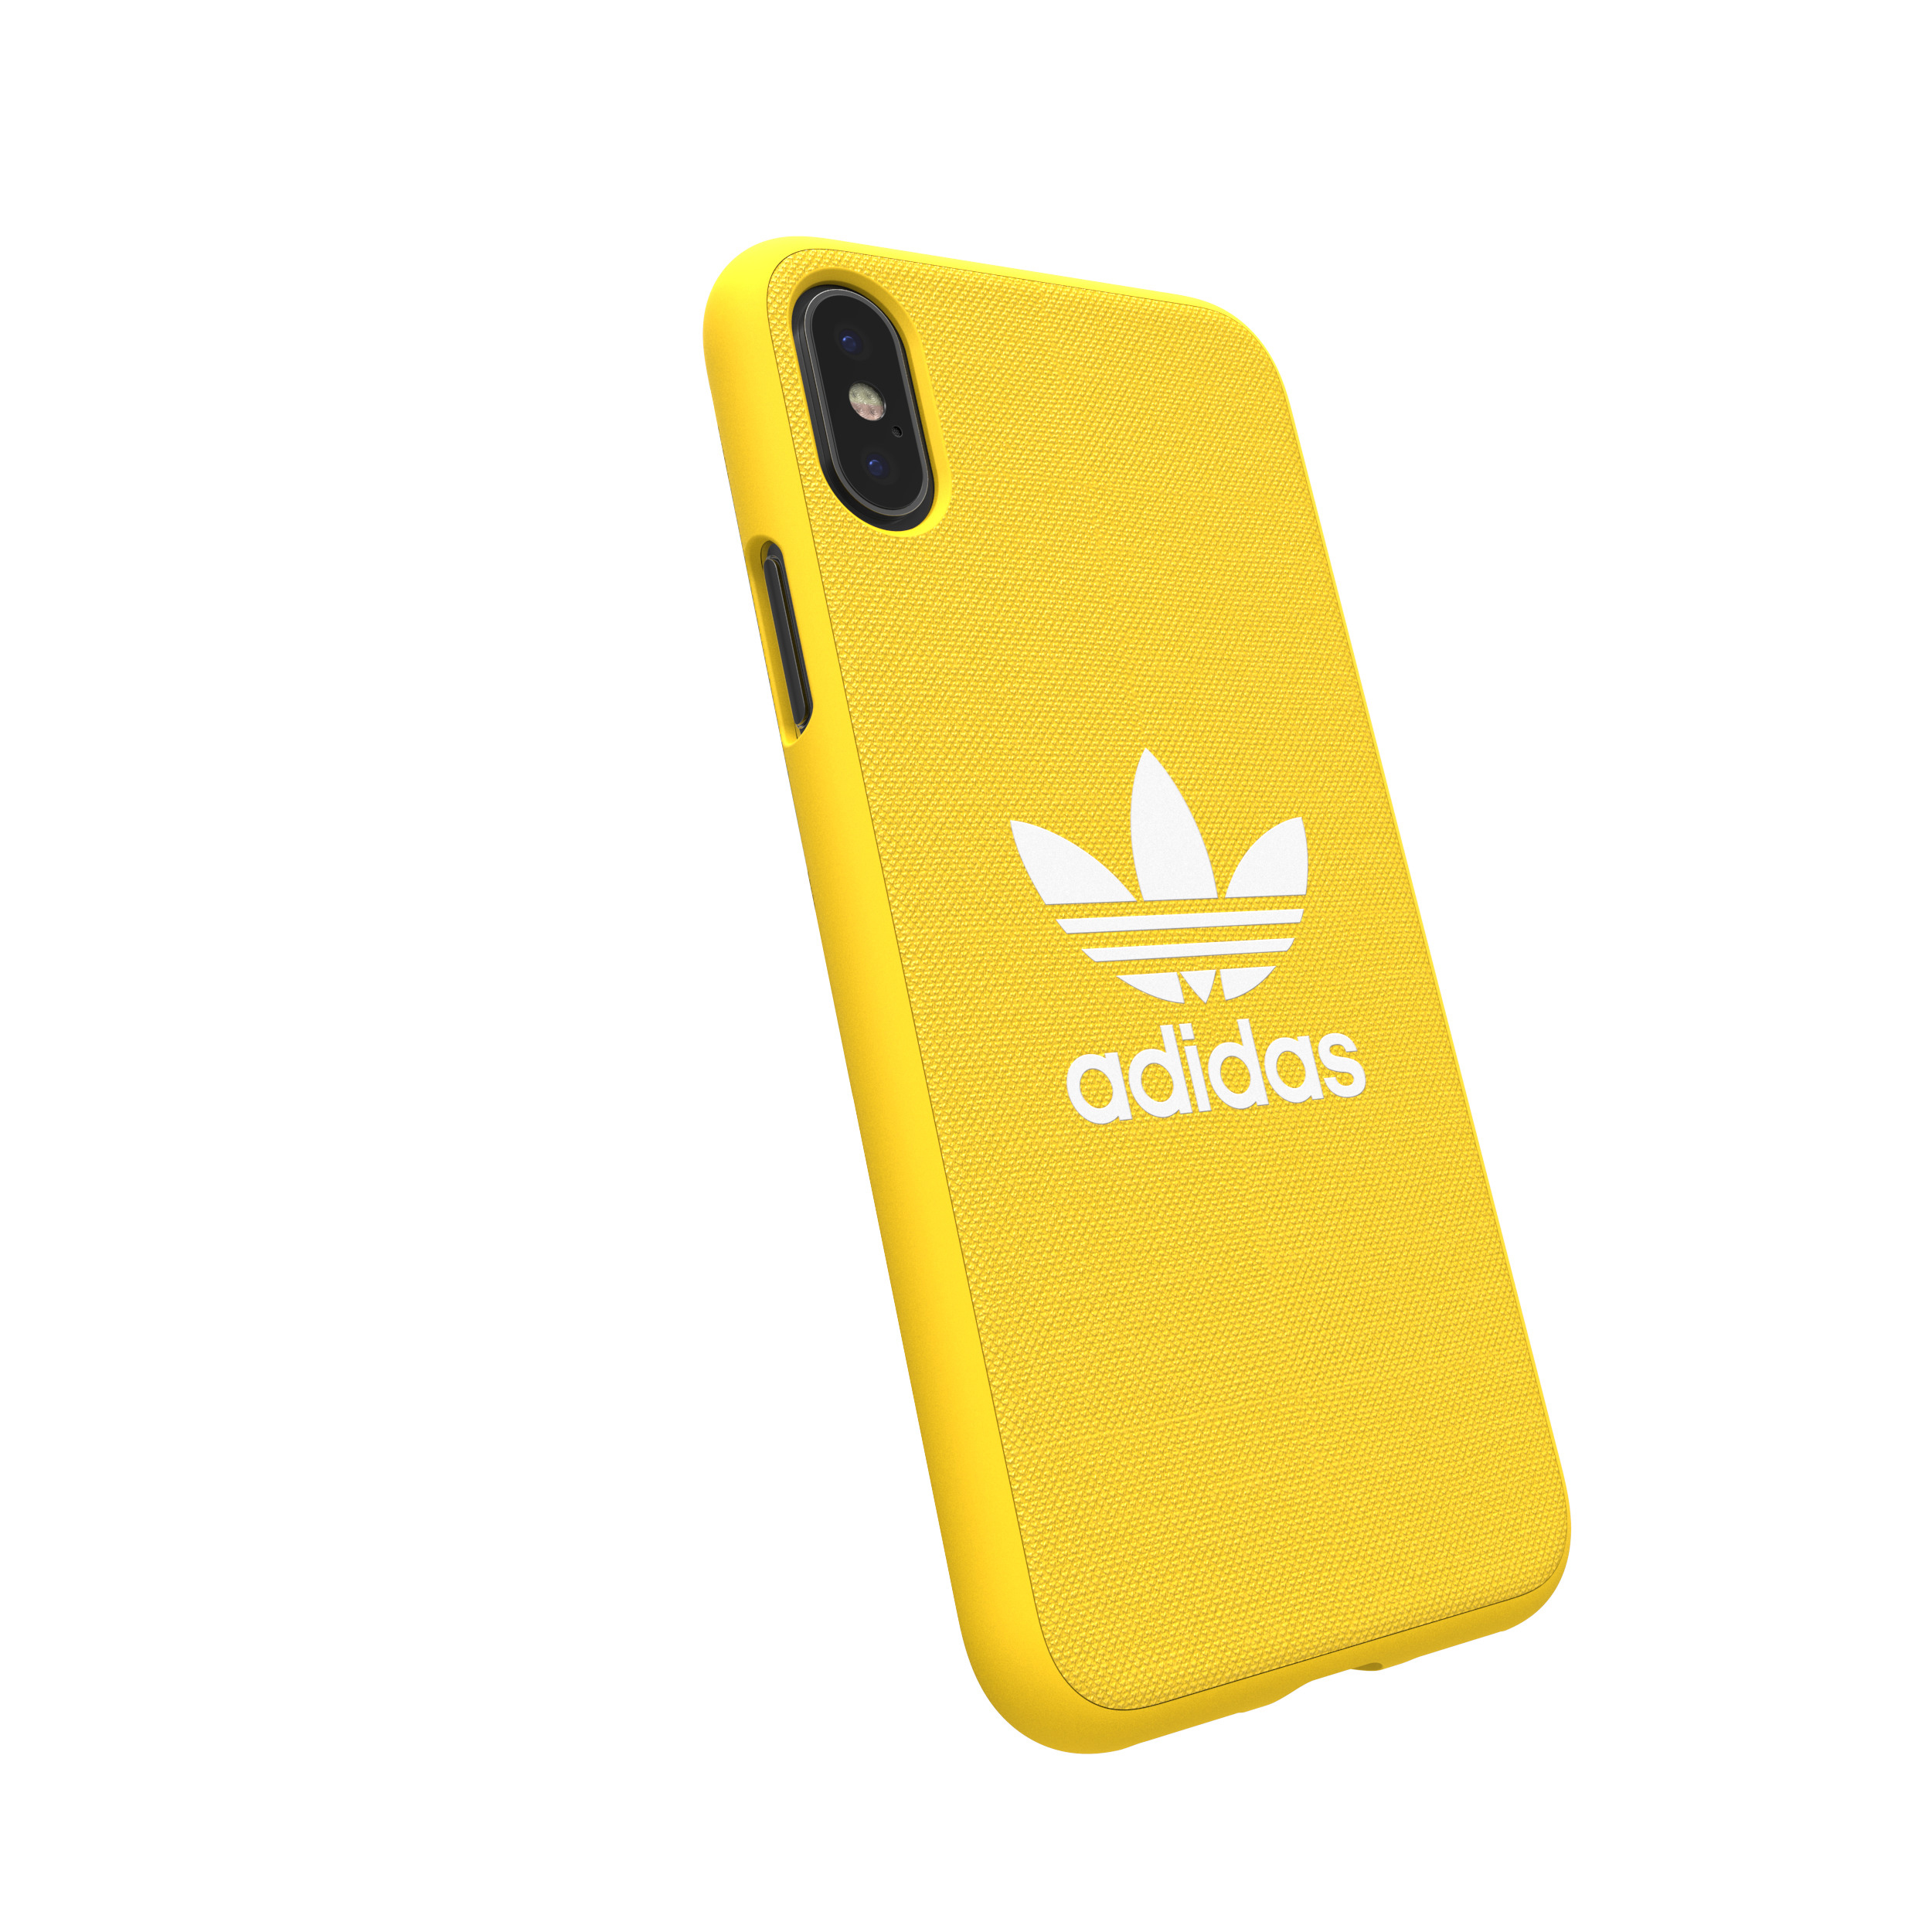 iPhone Apple, Moulded Backcover, Case, ORIGINALS Gelb X, ADIDAS